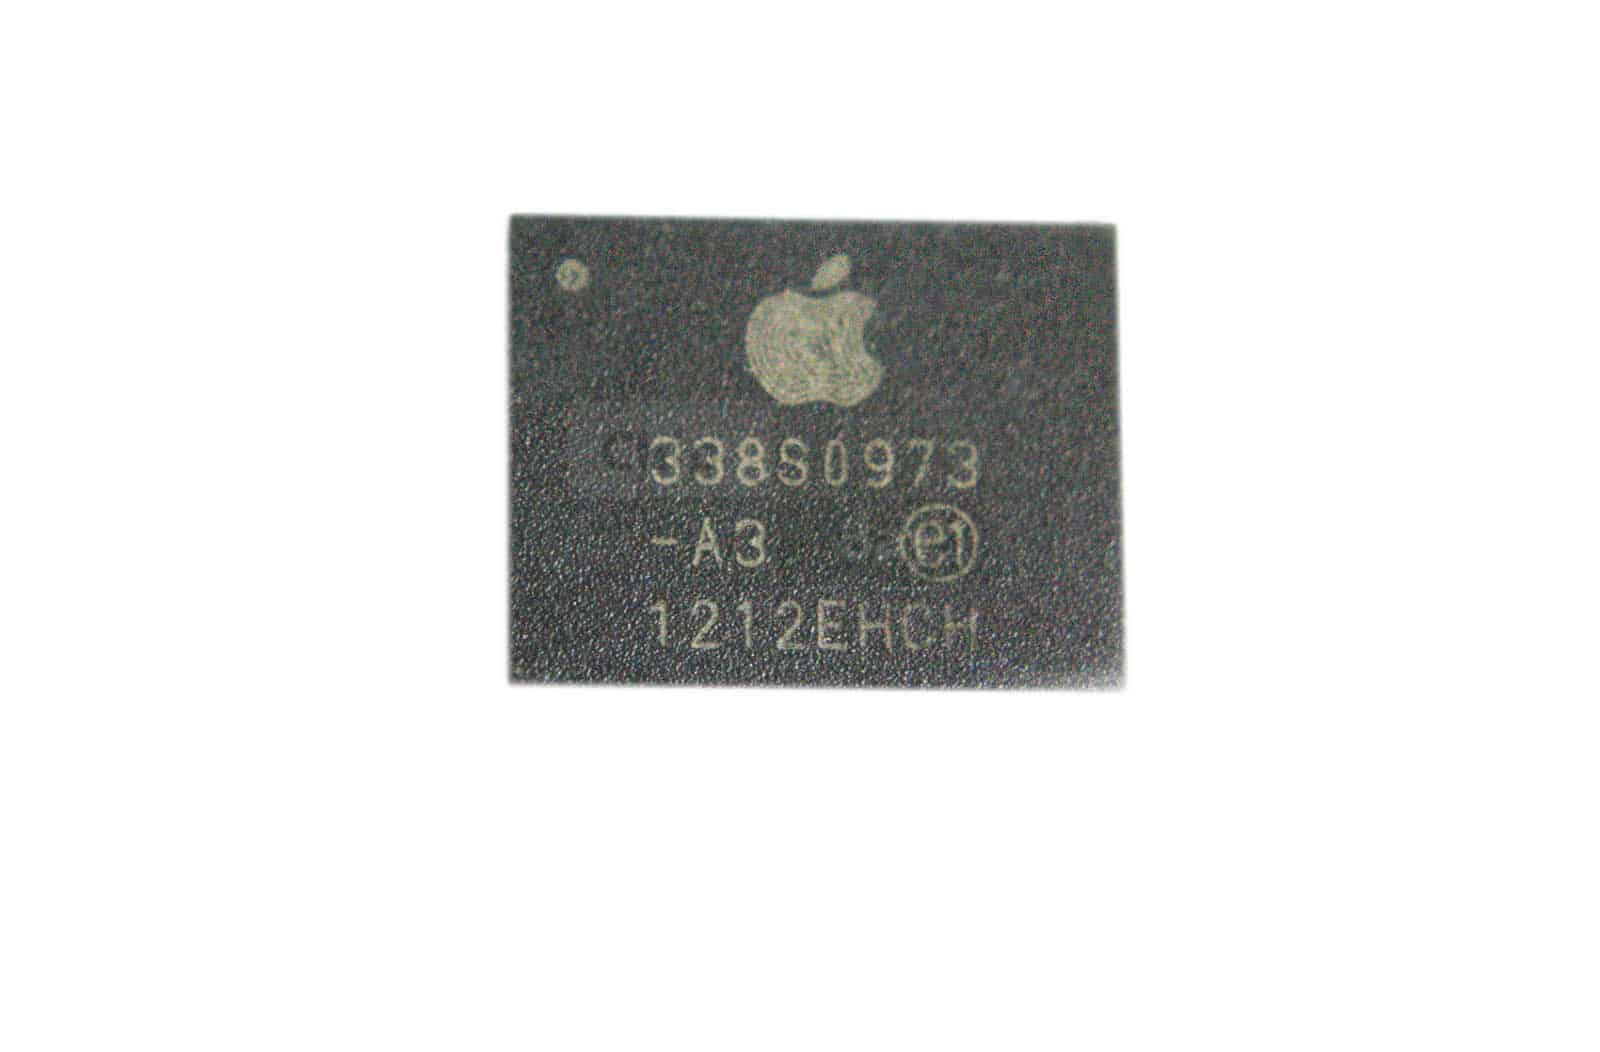 5x IPHONE 4S POWER MANAGEMENT IC 338S0973 338S0973-A3 CHIP